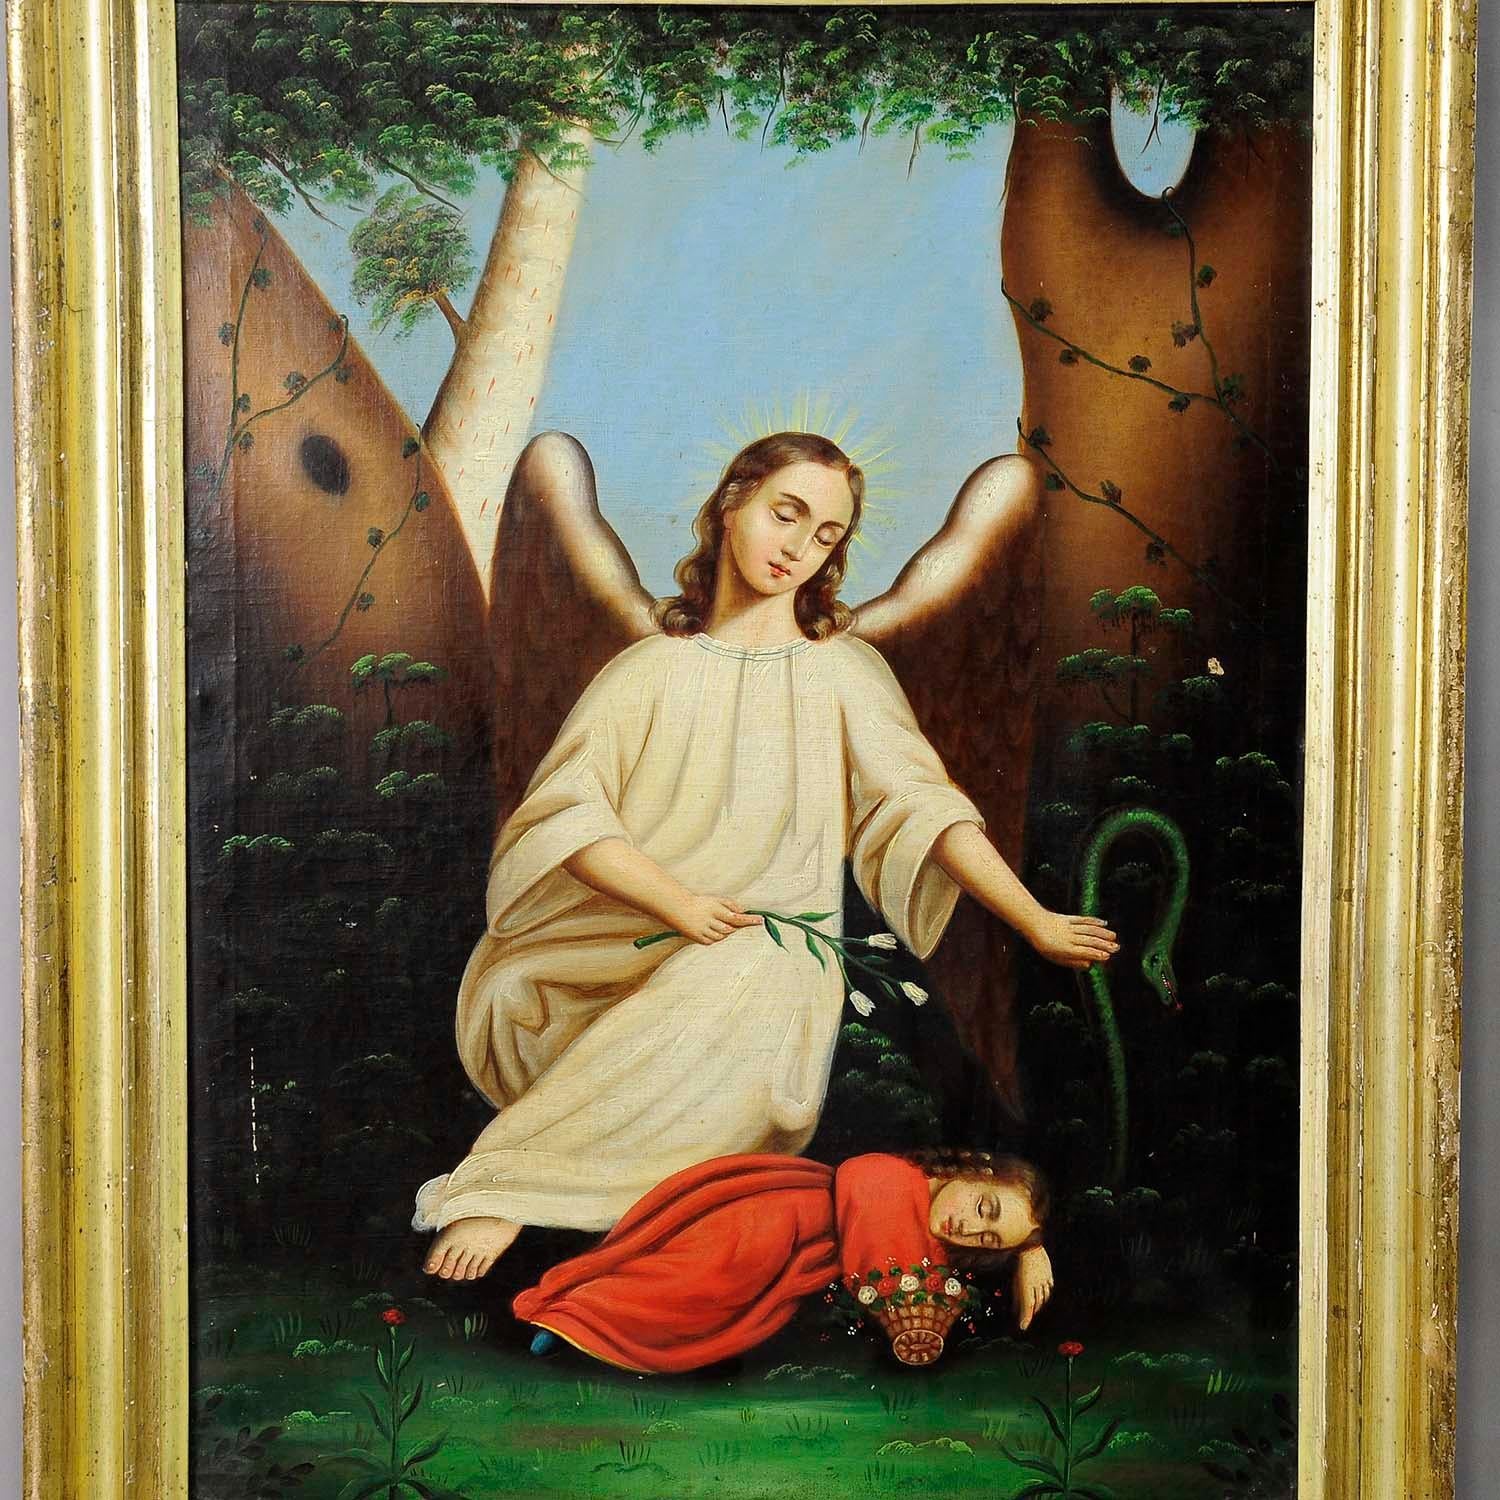 A great angelic oil painting depicting an angel sheltering a sleeping child from a snake. Oil painting on canvas with vigorous pastel colors. Framed with antique decorative gilded frame. Unsigned, Germany early 20th century. Very minor